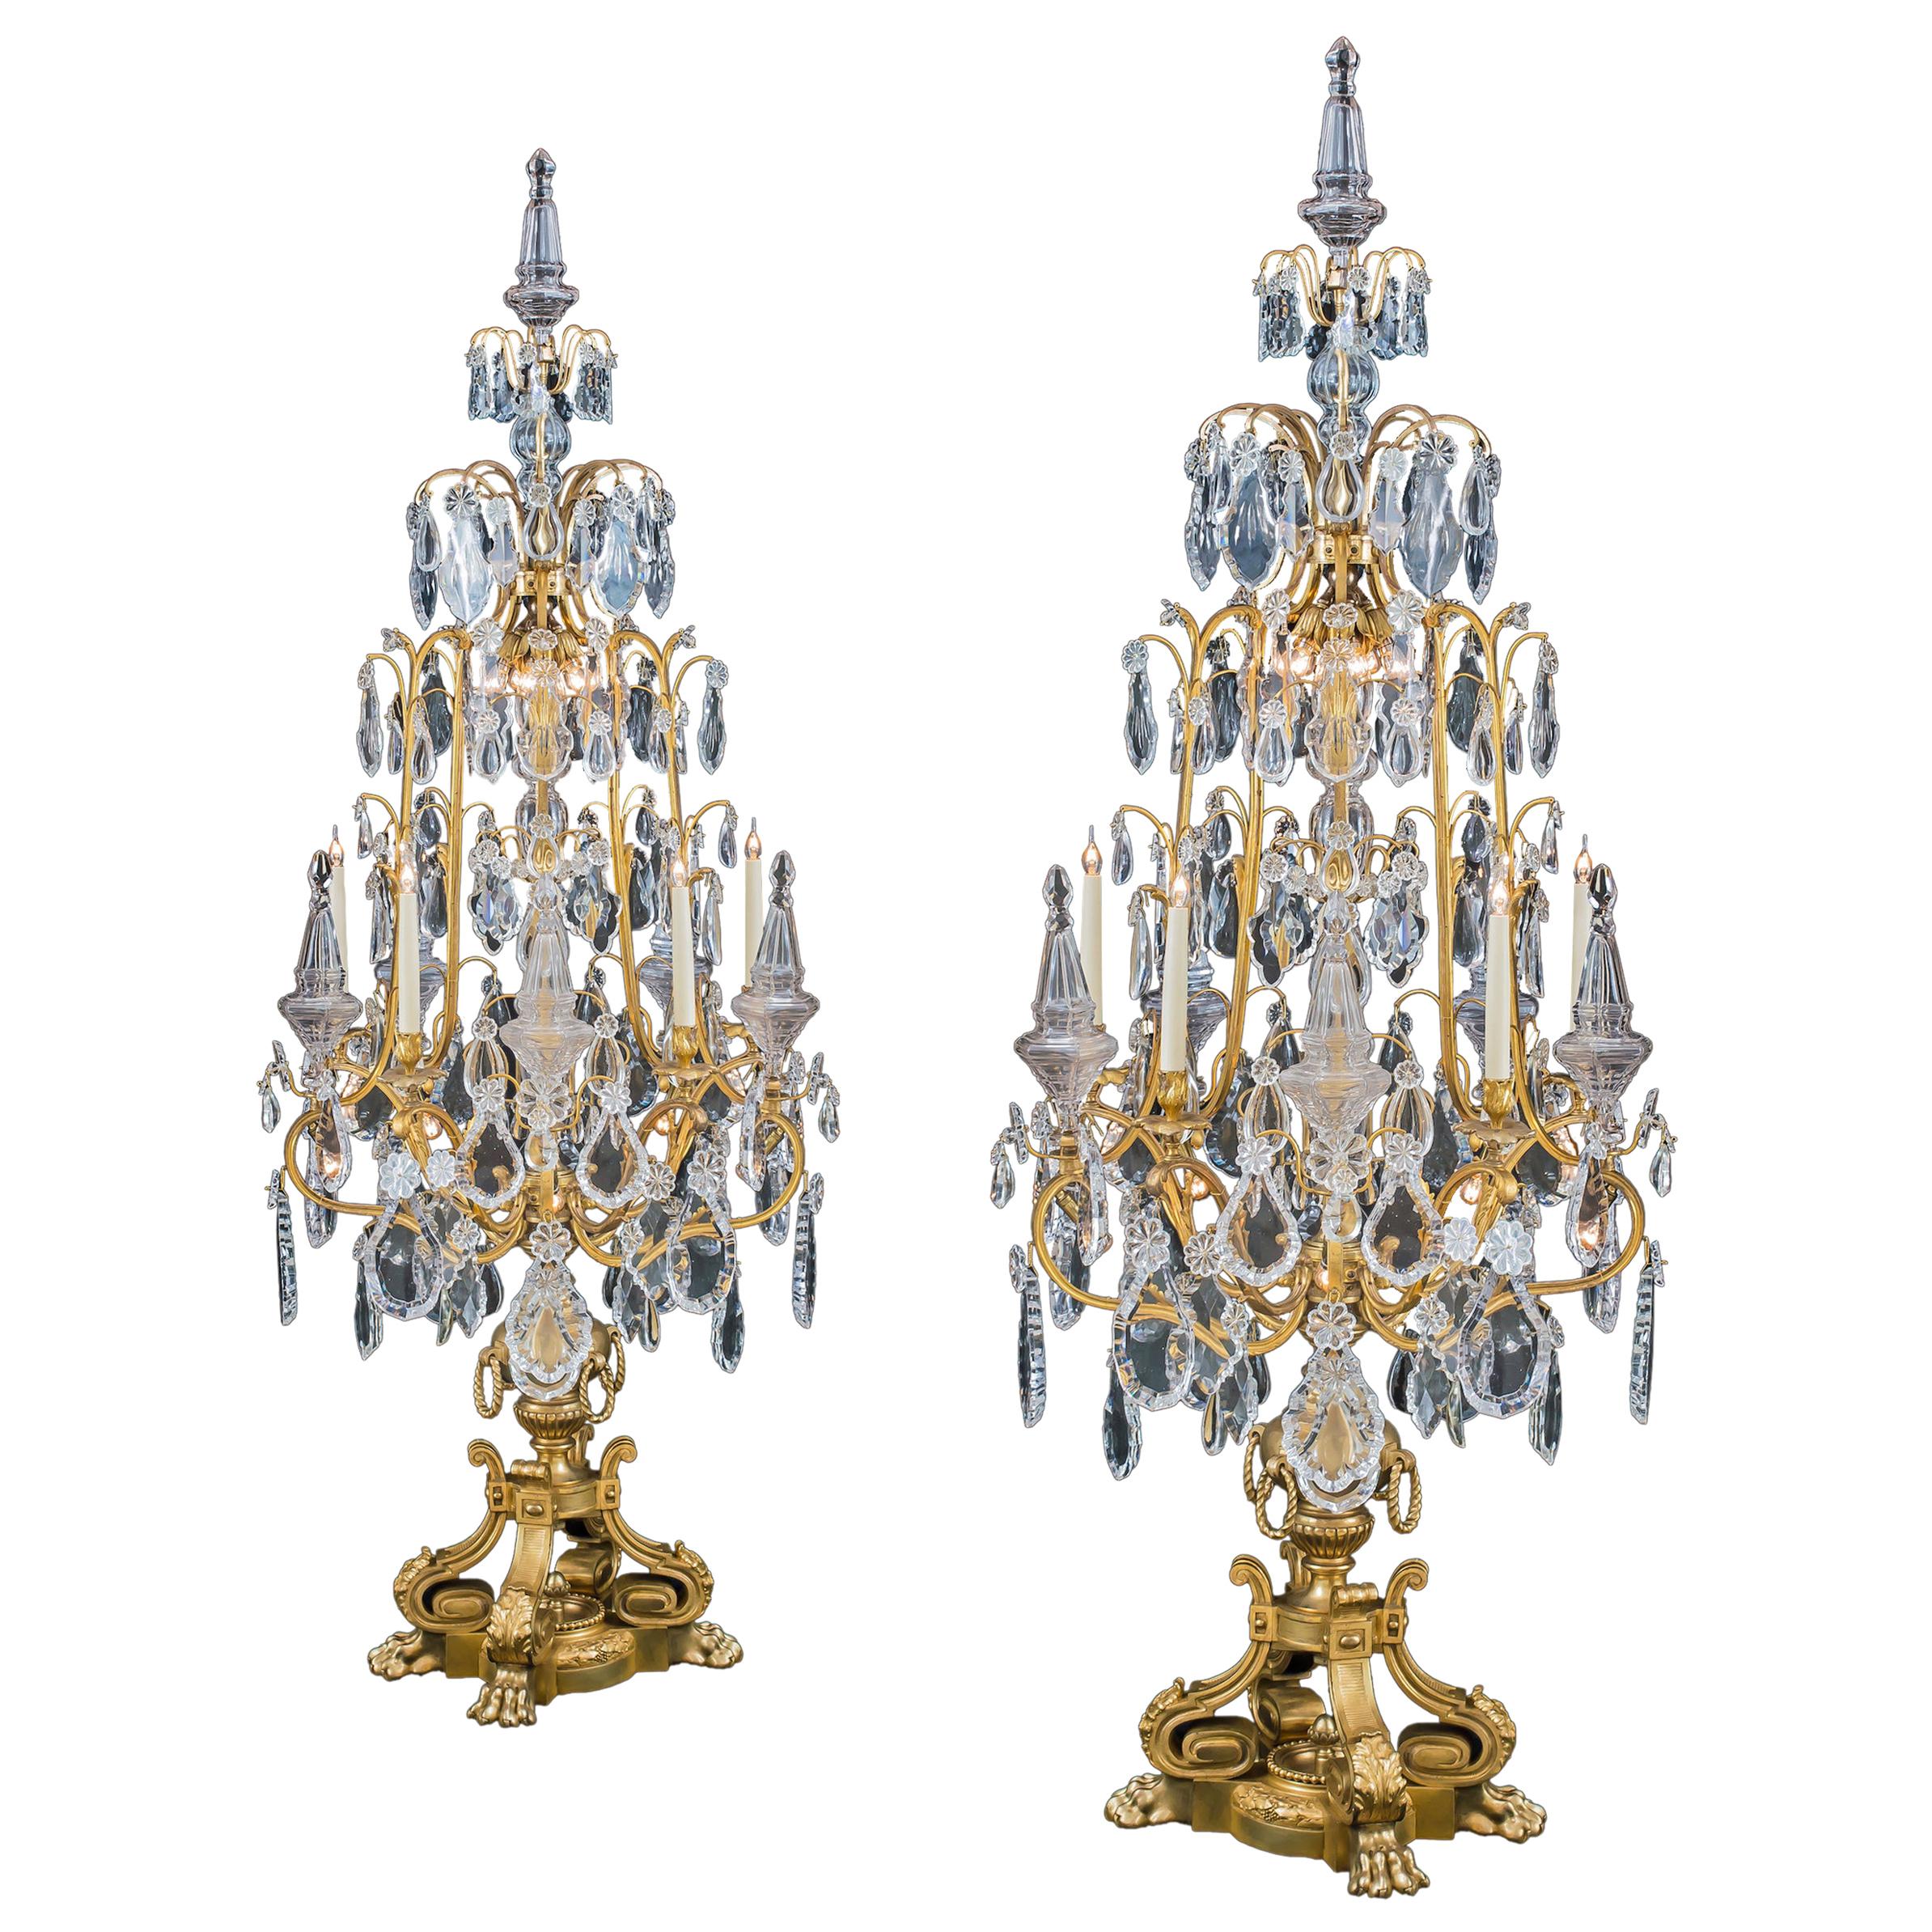 Monumental Pair of Louis XV Style Ormolu and Crystal Girandoles by Baccarat For Sale